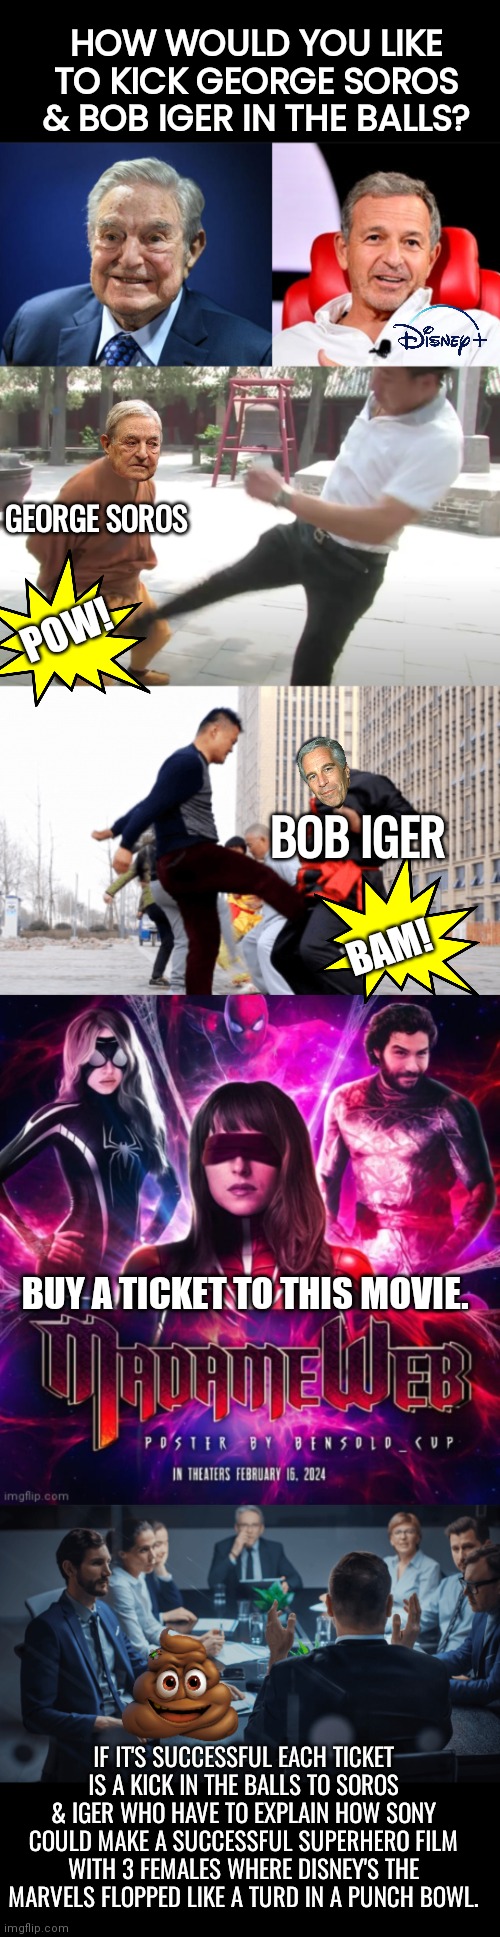 Kick Disney in the balks | HOW WOULD YOU LIKE TO KICK GEORGE SOROS & BOB IGER IN THE BALLS? GEORGE SOROS; POW! BOB IGER; BAM! BUY A TICKET TO THIS MOVIE. IF IT'S SUCCESSFUL EACH TICKET IS A KICK IN THE BALLS TO SOROS & IGER WHO HAVE TO EXPLAIN HOW SONY COULD MAKE A SUCCESSFUL SUPERHERO FILM WITH 3 FEMALES WHERE DISNEY'S THE MARVELS FLOPPED LIKE A TURD IN A PUNCH BOWL. | image tagged in black box,disney villains | made w/ Imgflip meme maker